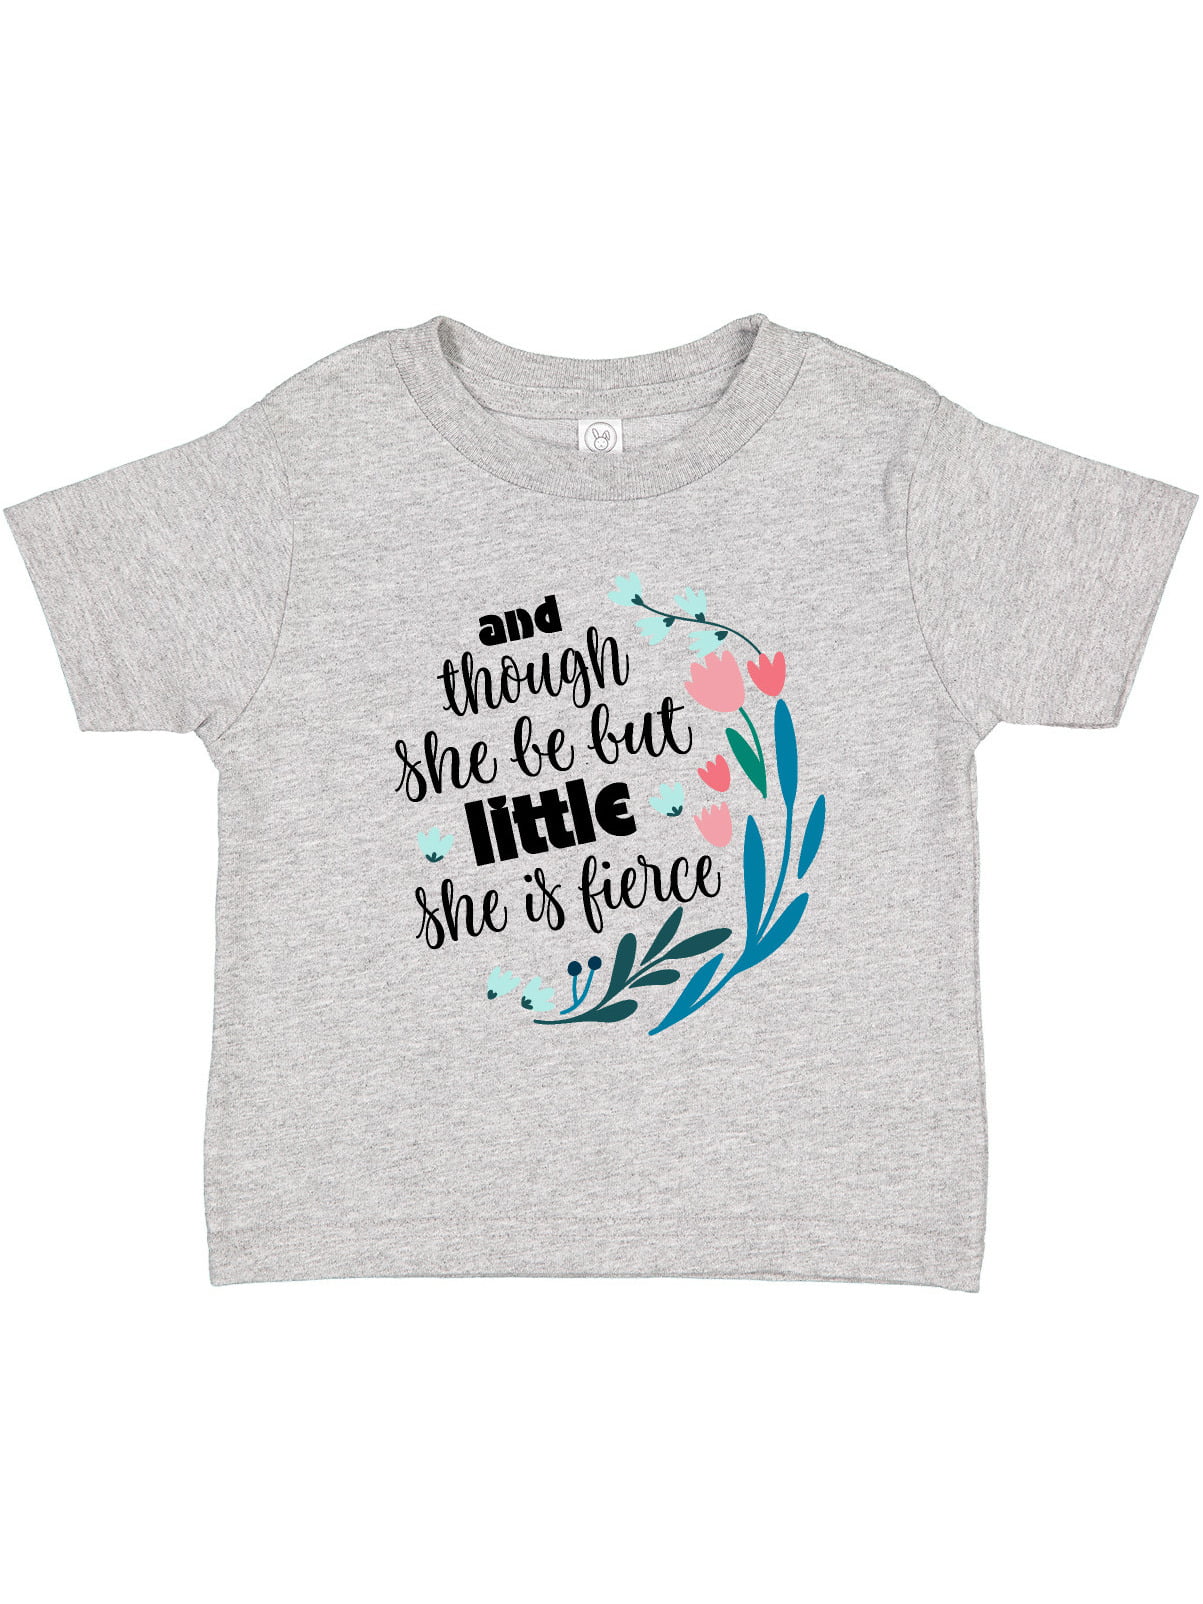 Running On The Wall and Though she be but Little she is Fierce Cropped Hoodie for Athletic Teen Girl 